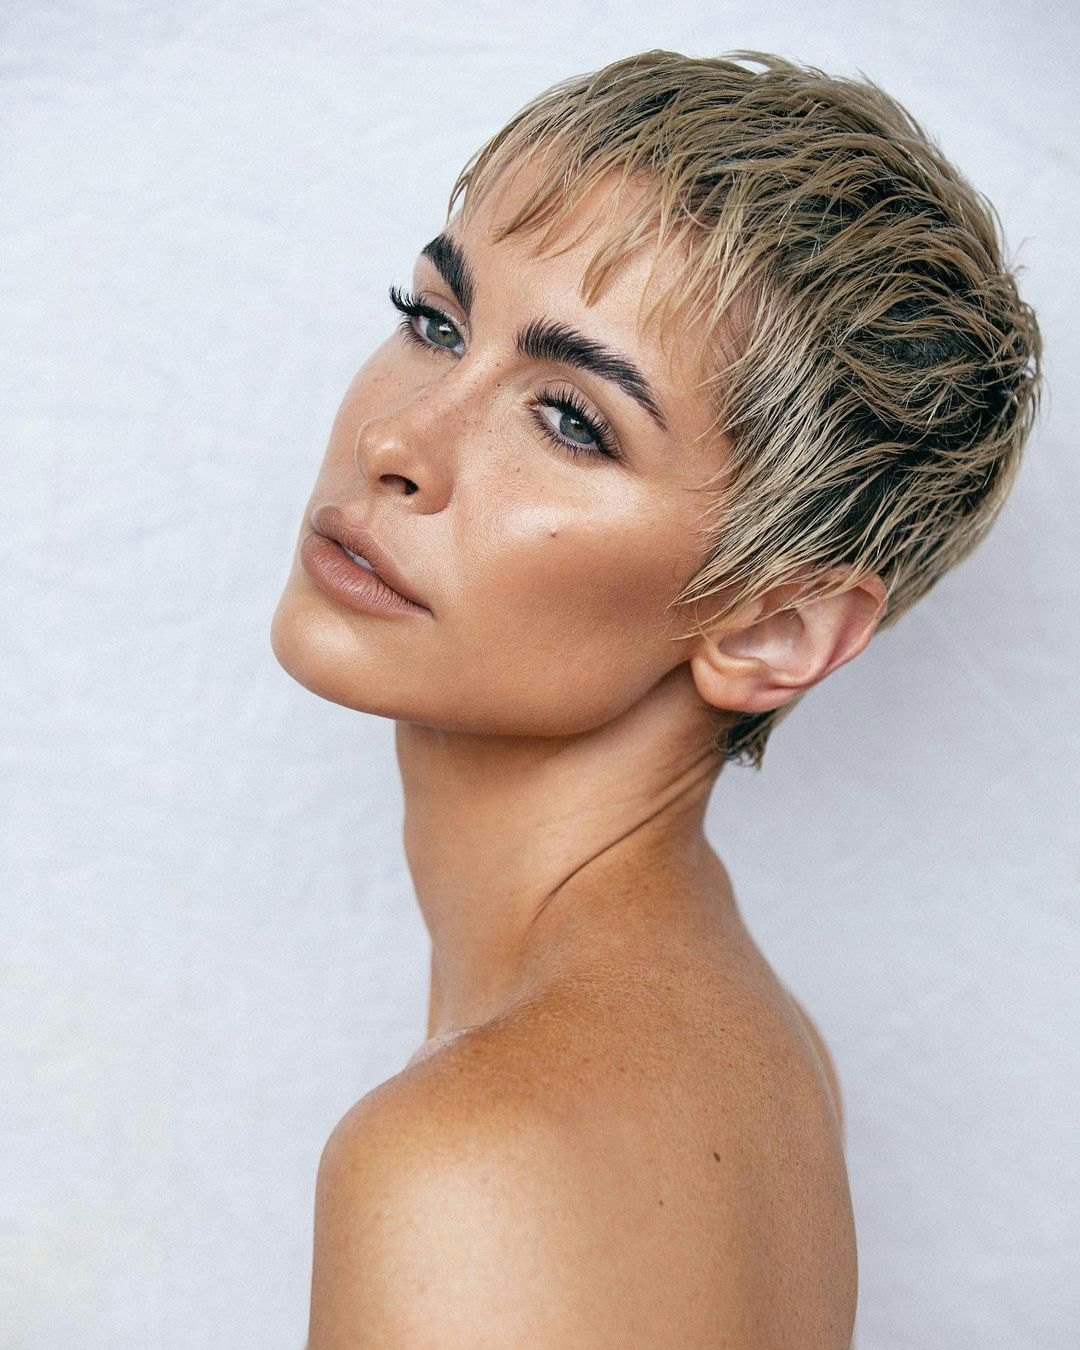 Flattering Pixie Cuts For Different Face Shapes